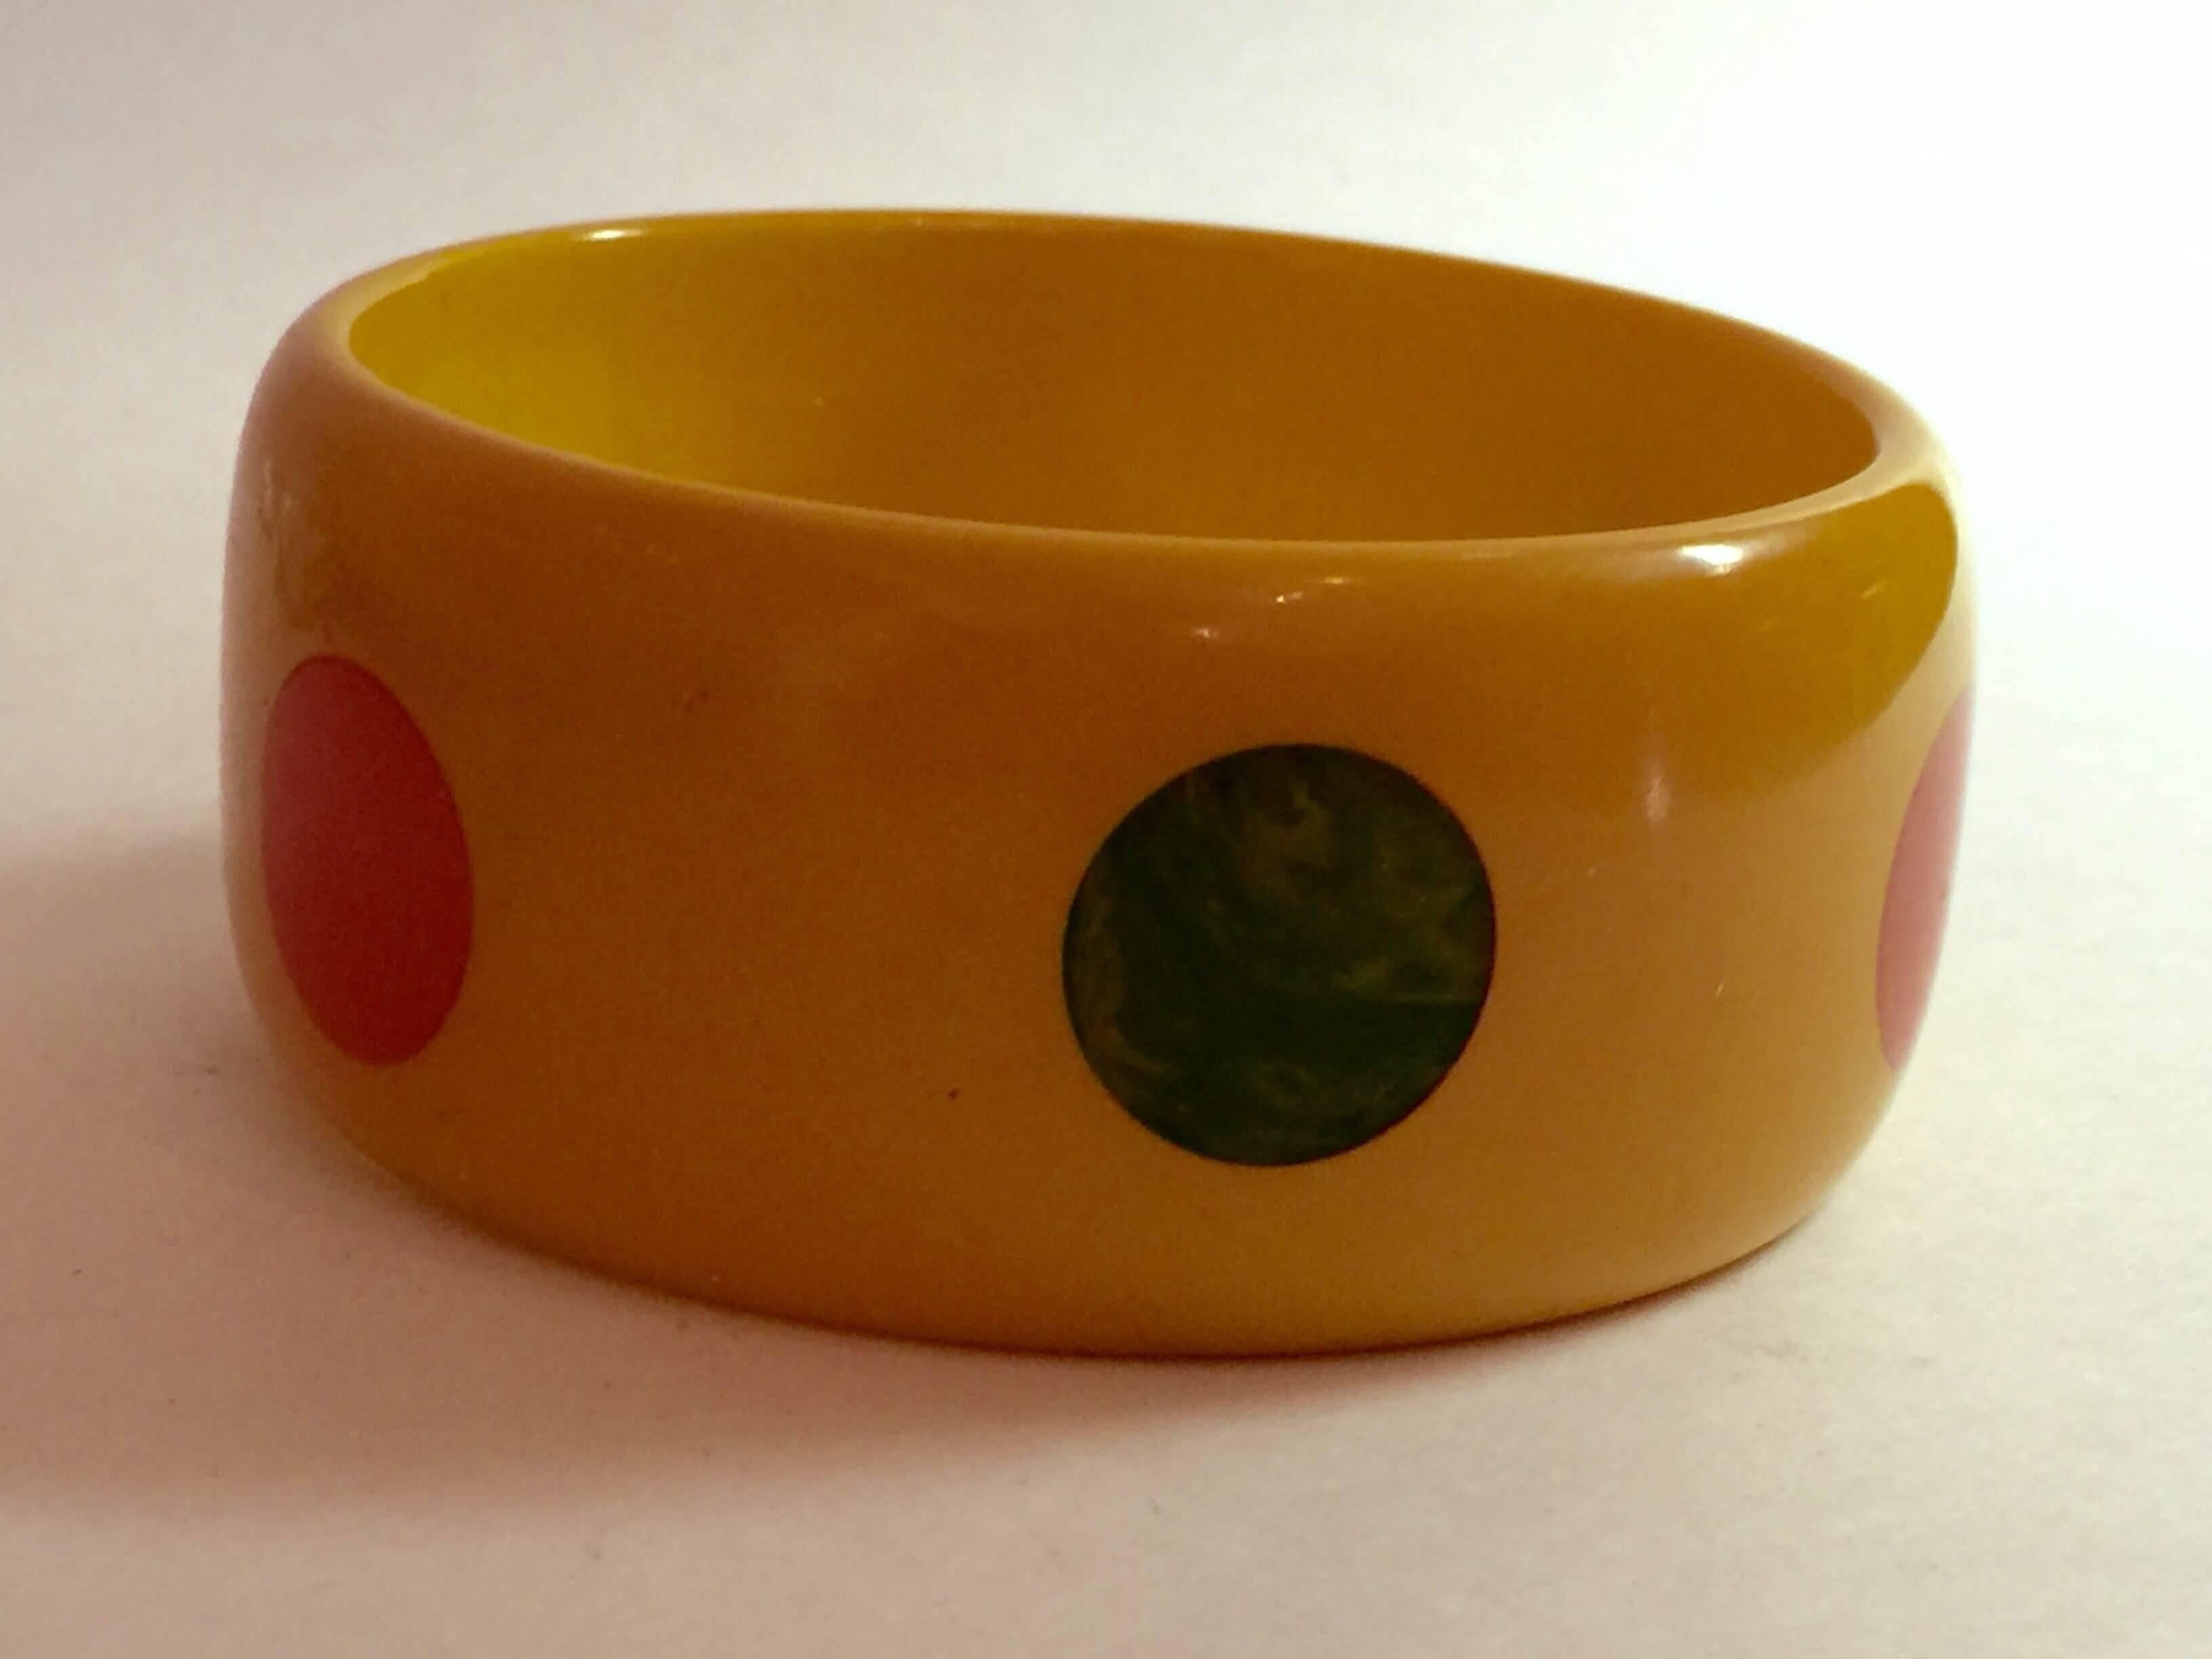 This 1930s Bakelite MultiColor Polka Dot bangle Bracelet is Flat Walled, in cream bakelite with alternating placement polka dots laminated in ornage and green. This is not a thick walled chunky bangle, so it fits small,  medium and even some larger